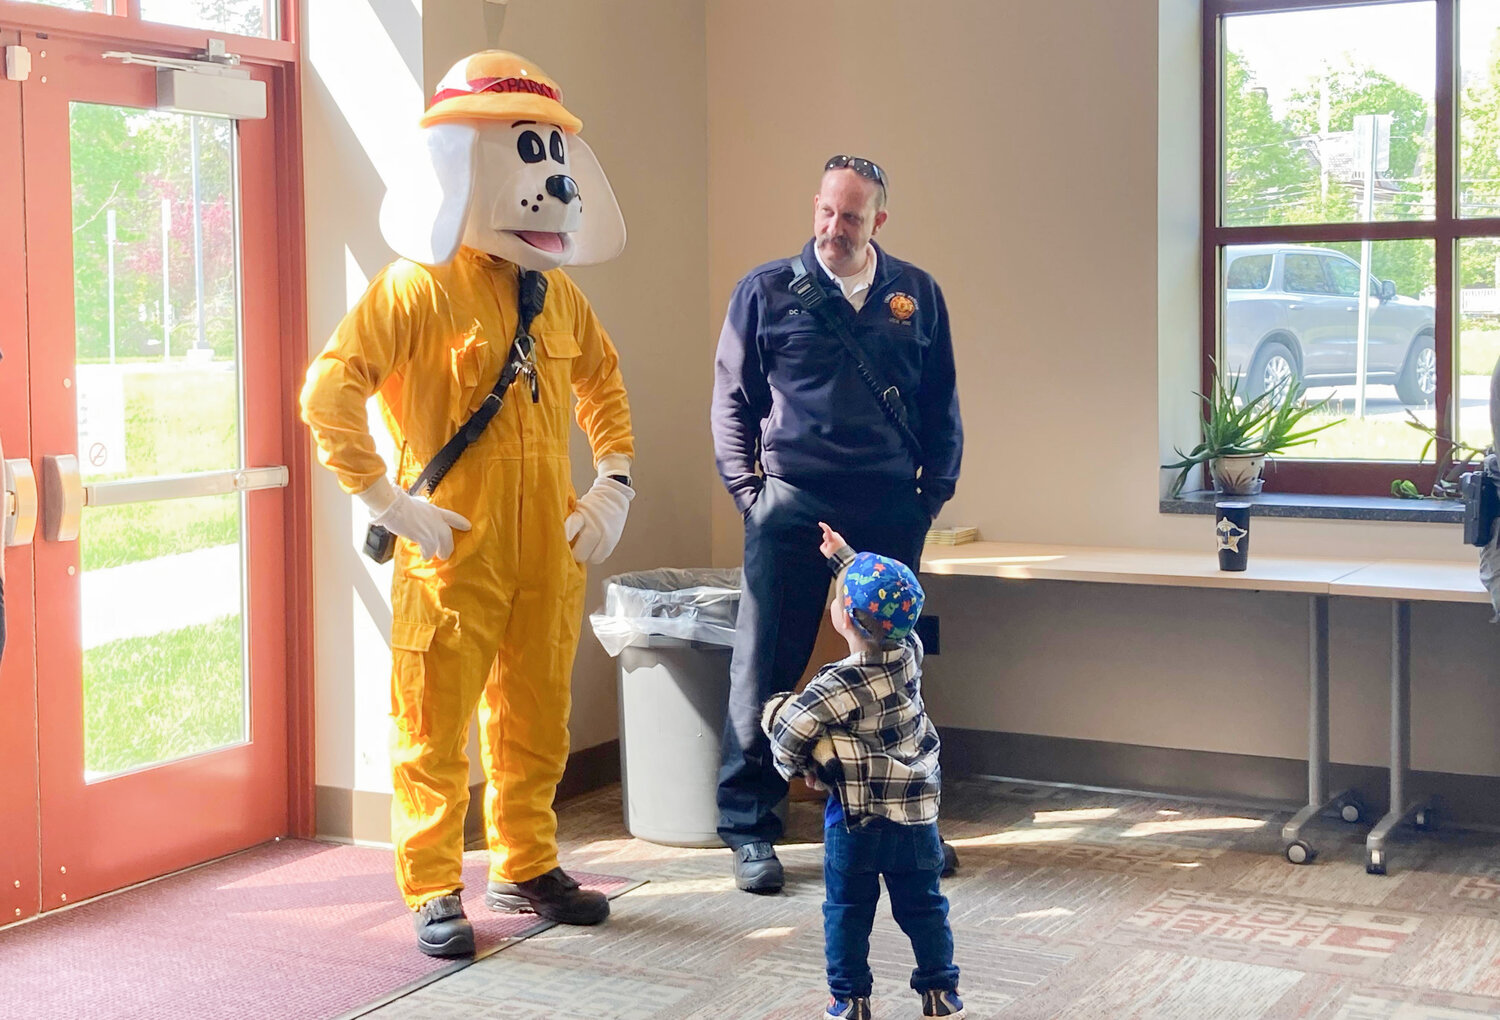 The Oneida Fire Department and Oneida Police Department joined the Oneida Public Library for its children's story time and showed young kids their equipment